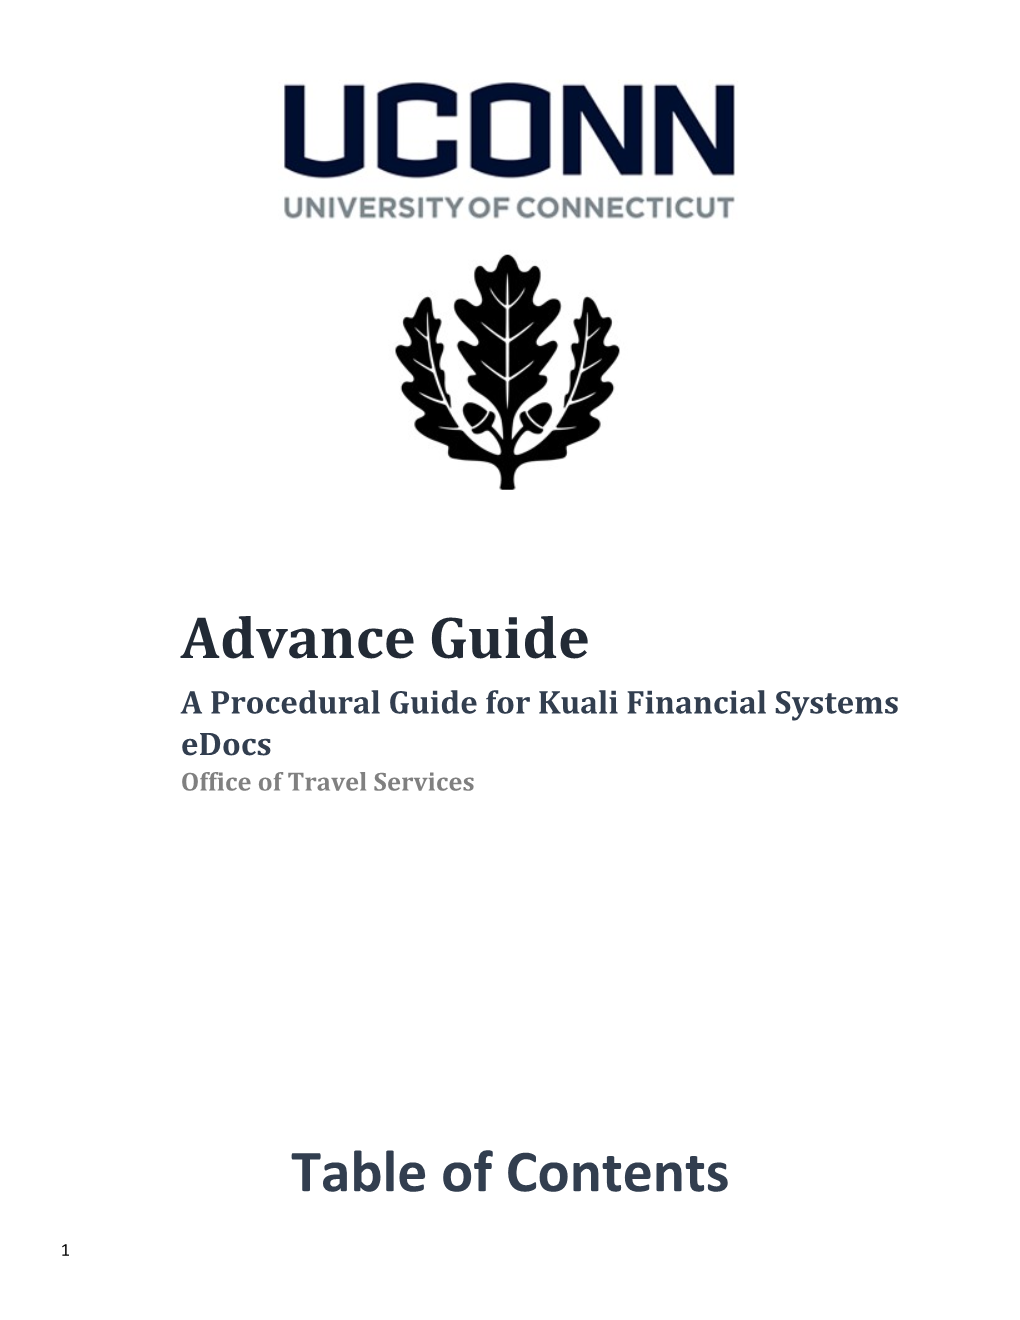 A Procedural Guide for Kuali Financial Systems Edocs